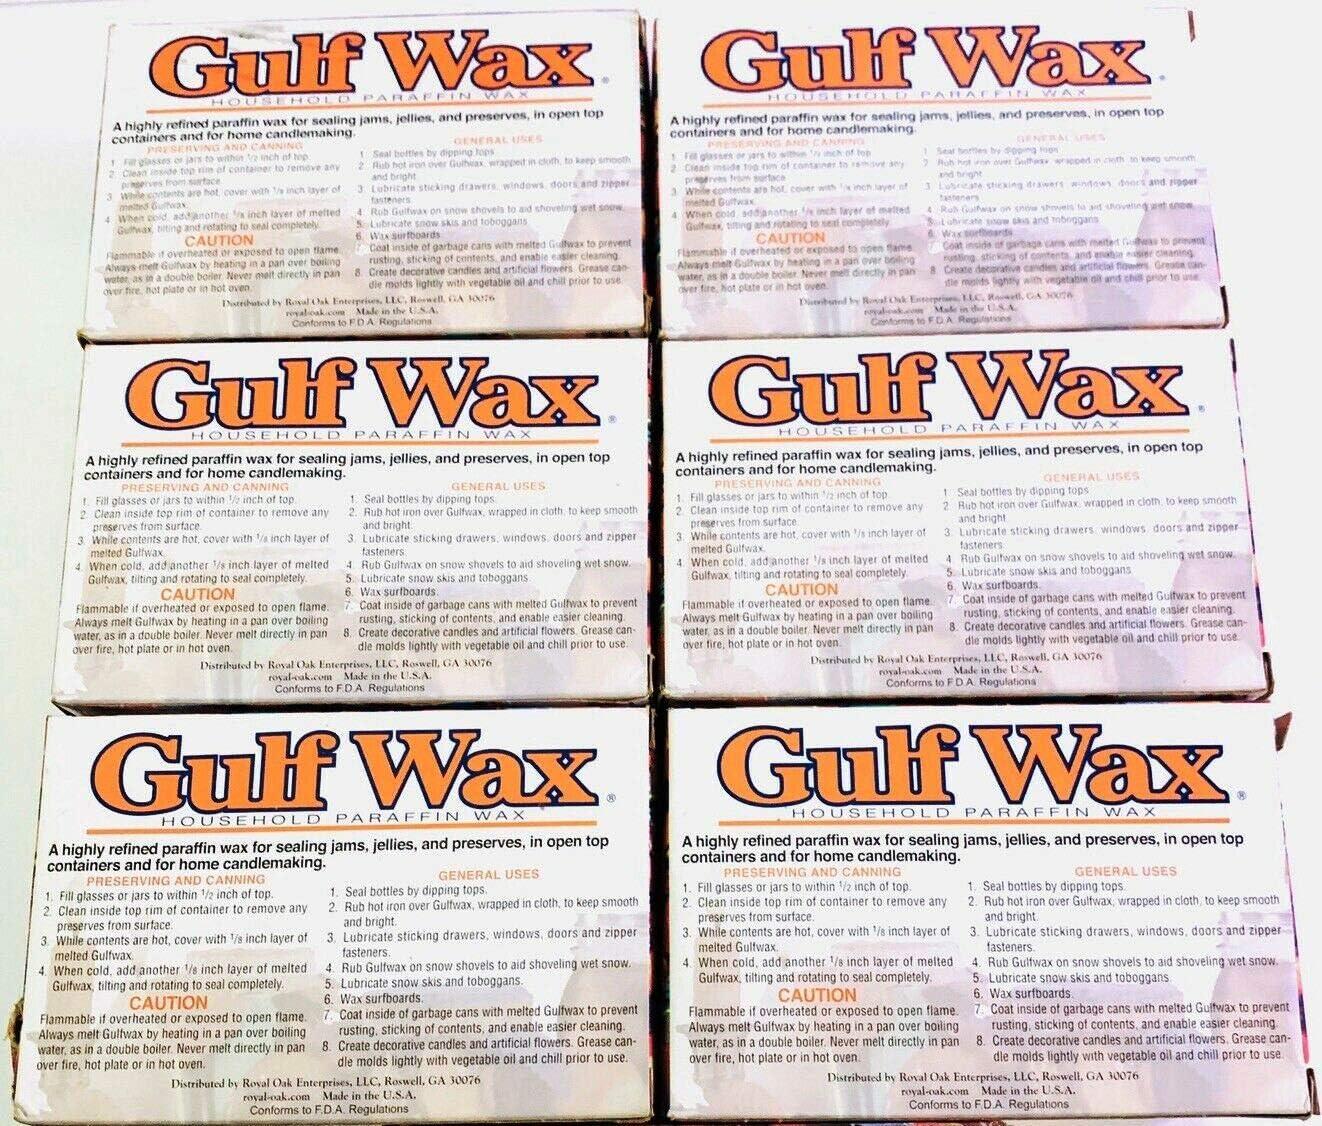 Gulf Wax Household Paraffin Wax for Canning Candlemaking 16 oz.